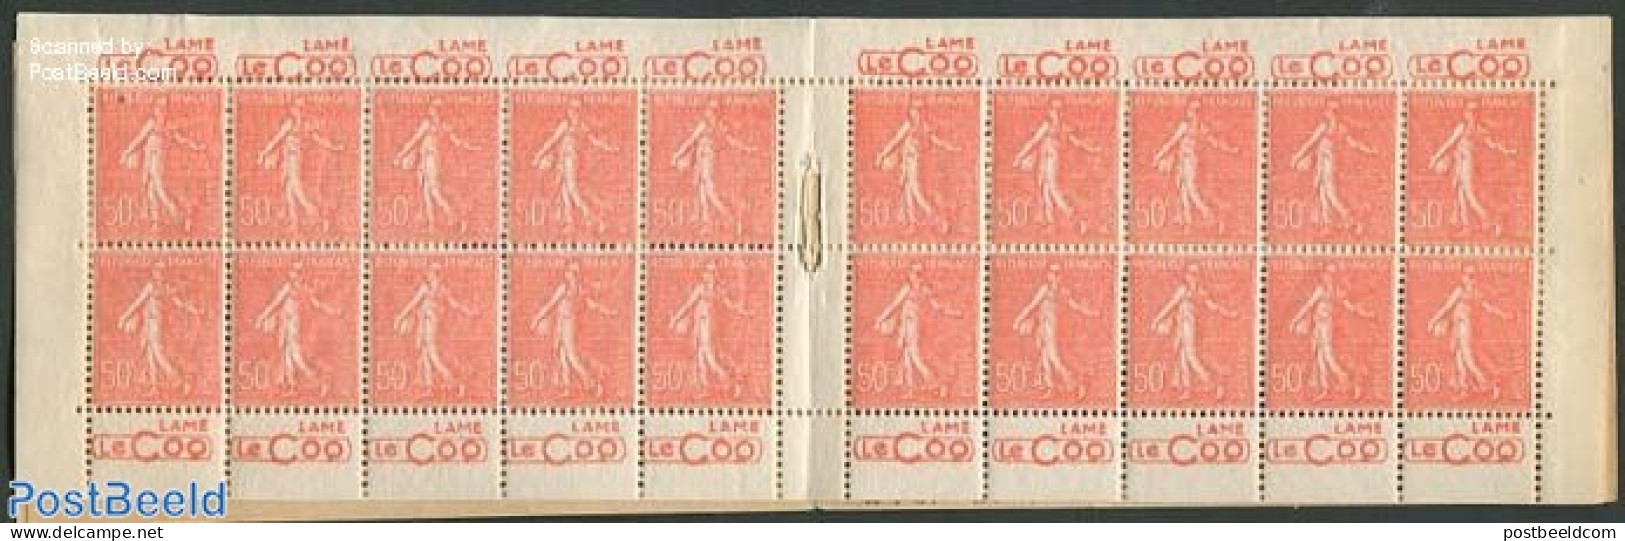 France 1924 20x50c Booklet (Lame Le Coq 4x), Mint NH, Stamp Booklets - Unused Stamps